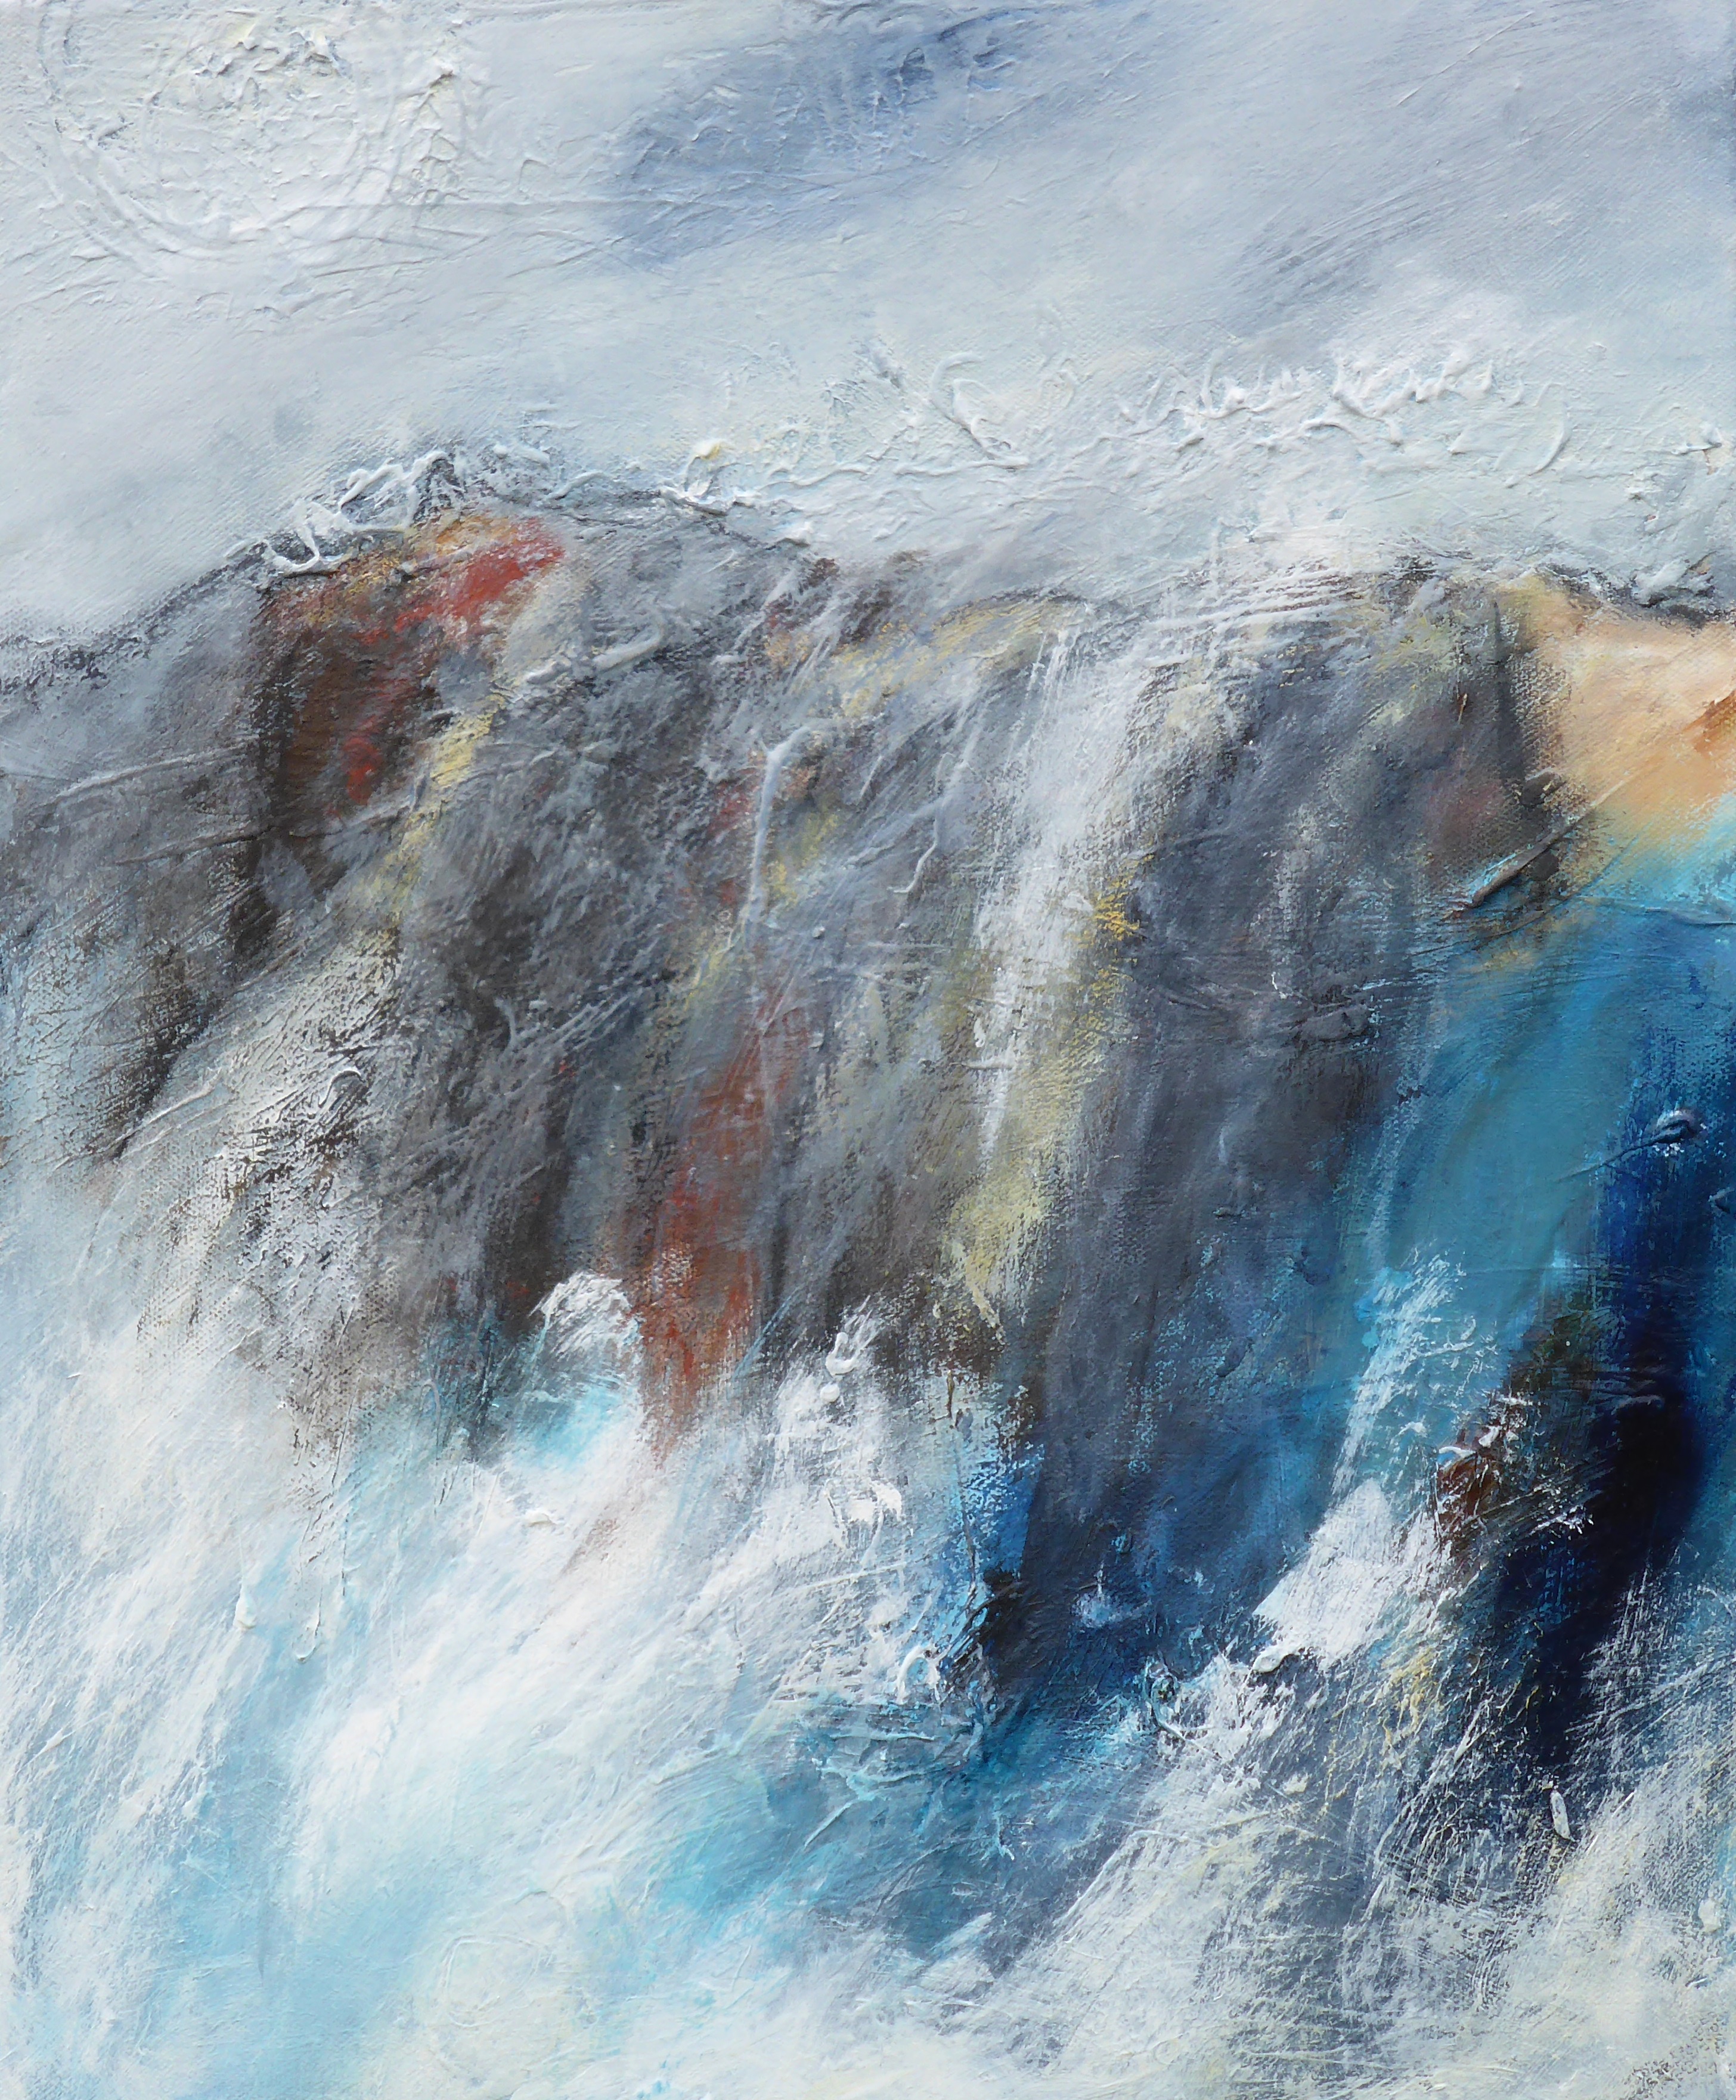 Penwith Cliffs i, Mixed Media on Canvas, 50 x 40cm